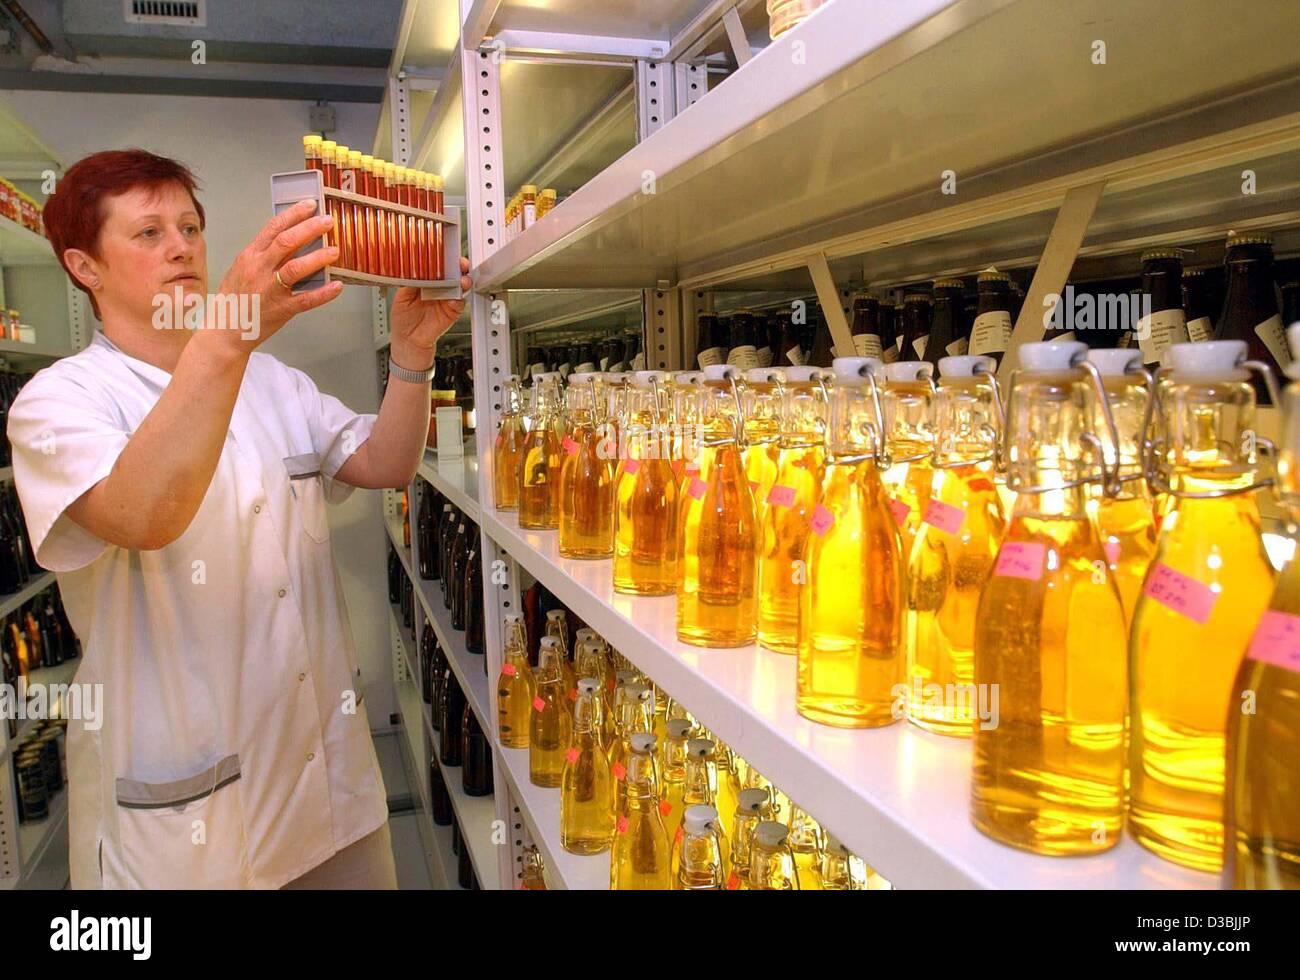 (dpa) - Employee Brigitte Mittag checks the quality of beer samples at the Radeberger export beer brewery in Radeberg, eastern Germany, 15 April 2003. The traditional brewery was founded in 1872, and again was newly founded after the German reunification in 1990. Stock Photo